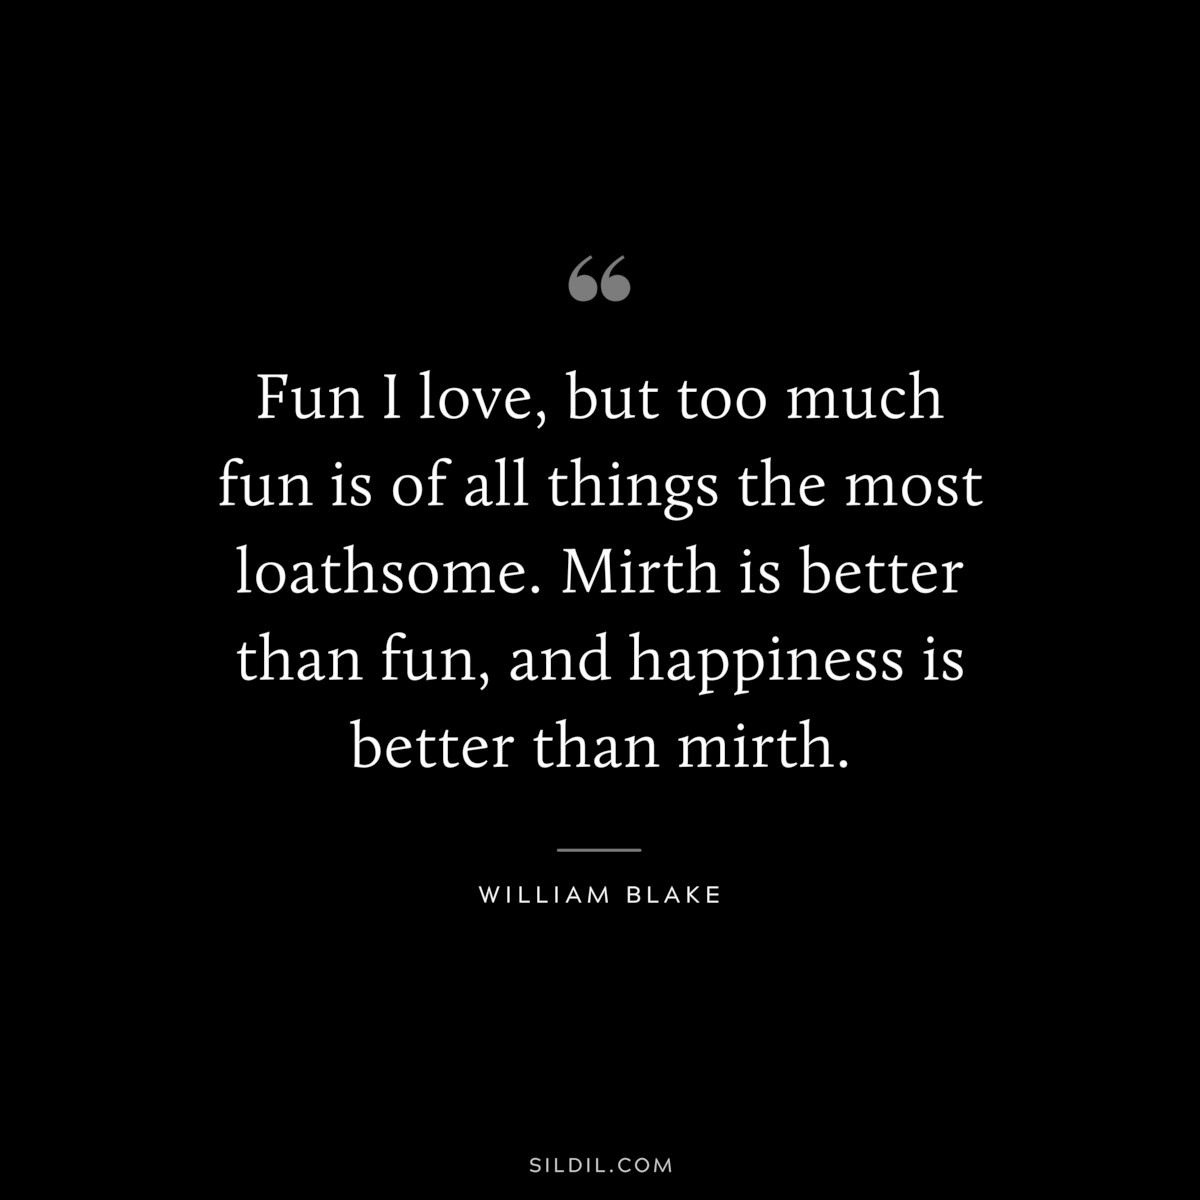 Fun I love, but too much fun is of all things the most loathsome. Mirth is better than fun, and happiness is better than mirth. ― William Blake